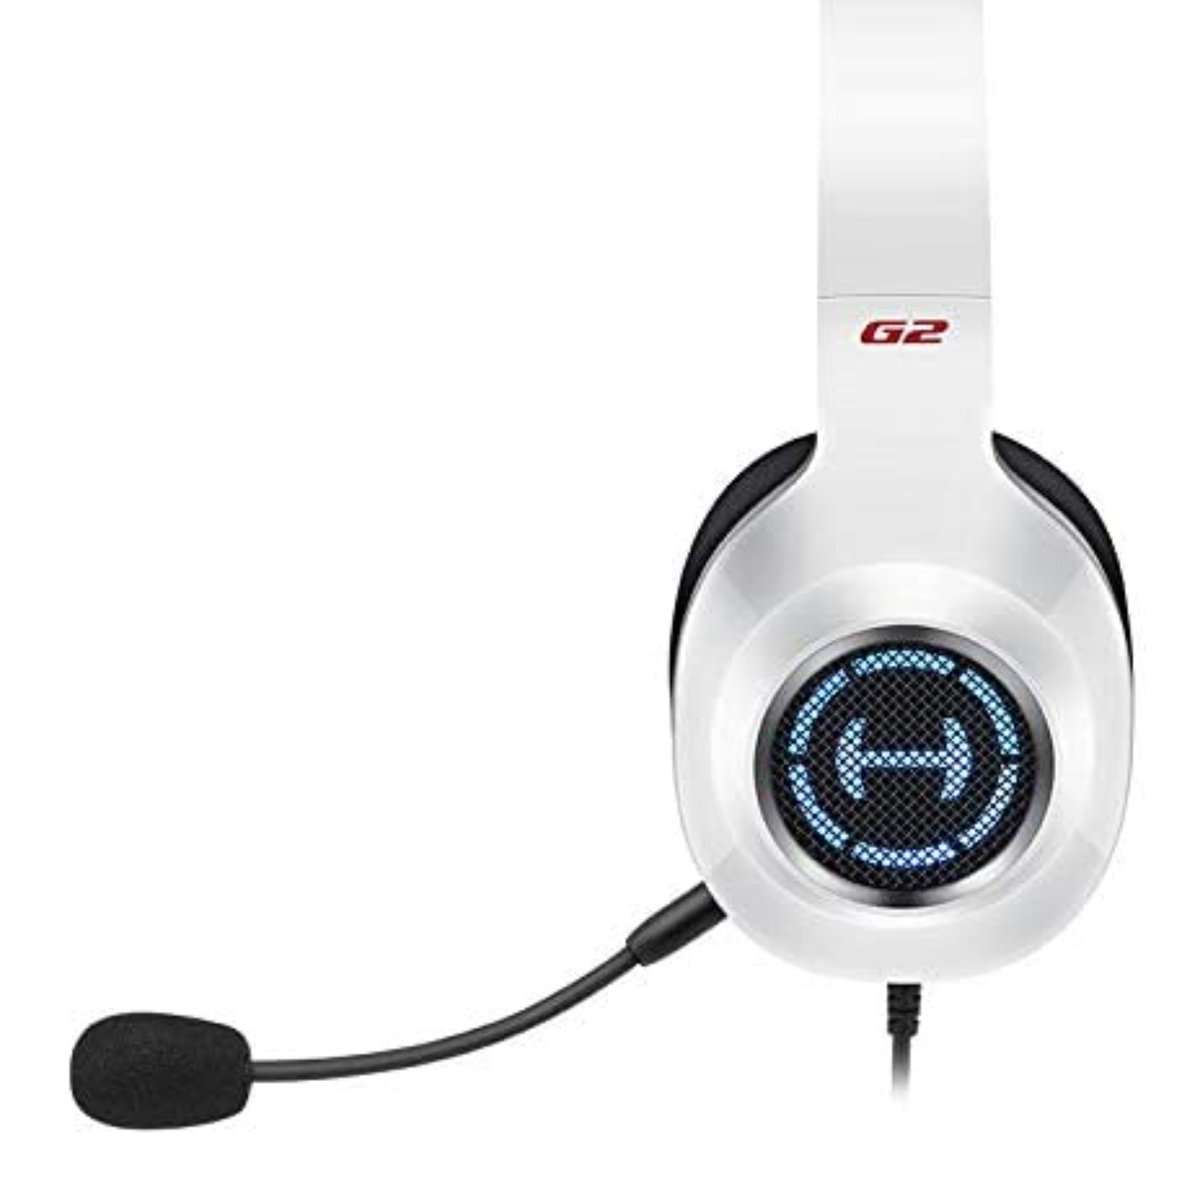 Edifier Wired GamingHeadset G2-II White